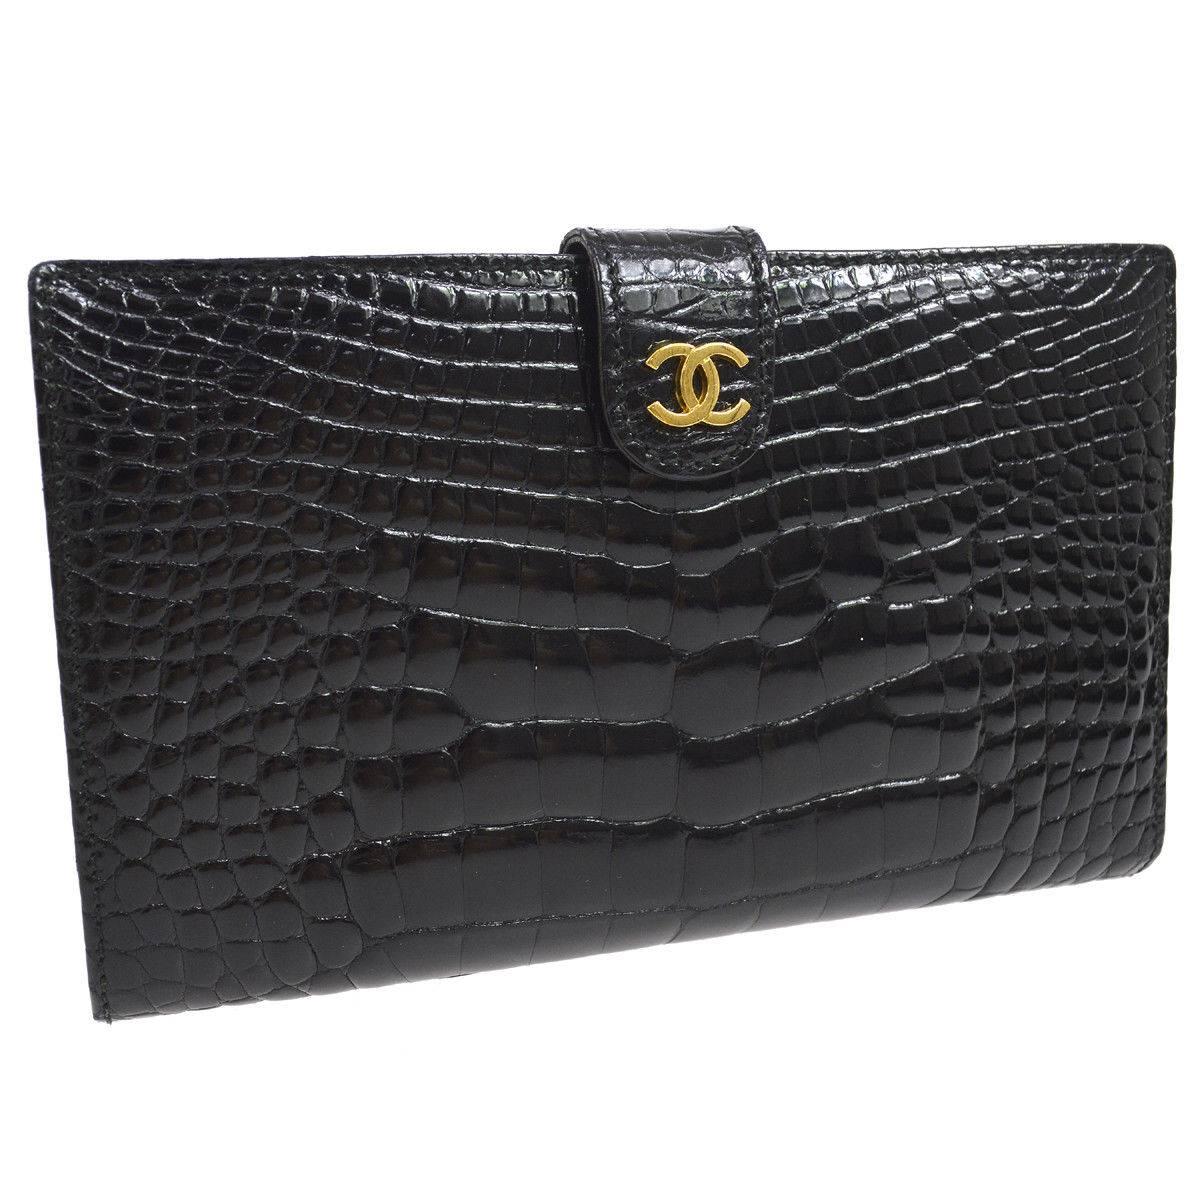 Chanel Rare Black Crocodile and Caviar LeatherEvening Gold Clutch Wallet in Box